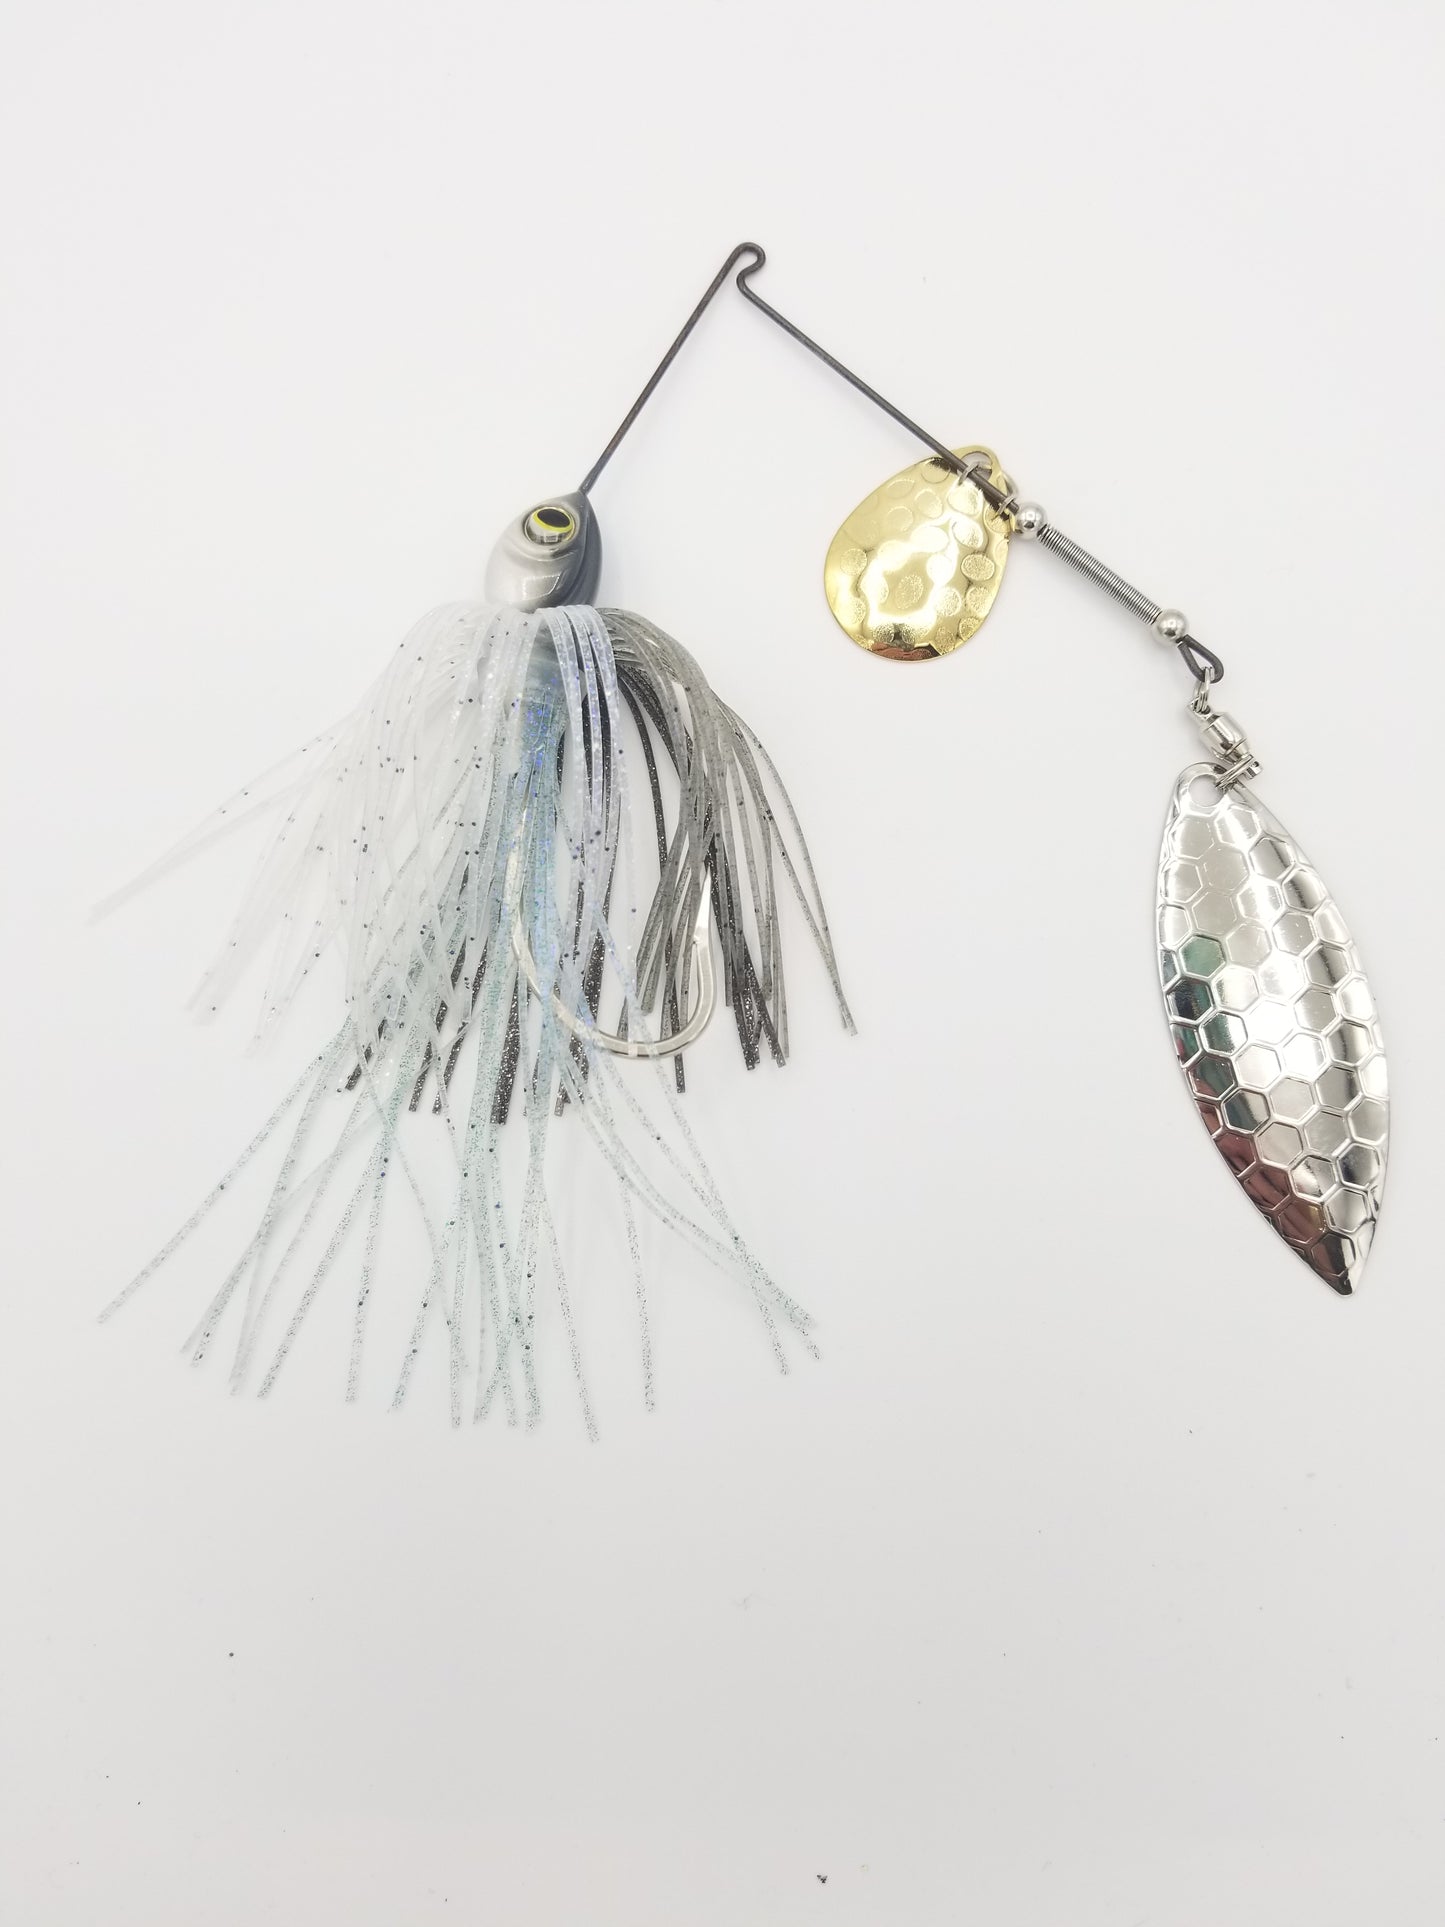 Bowed Up Lures Spinnerbaits